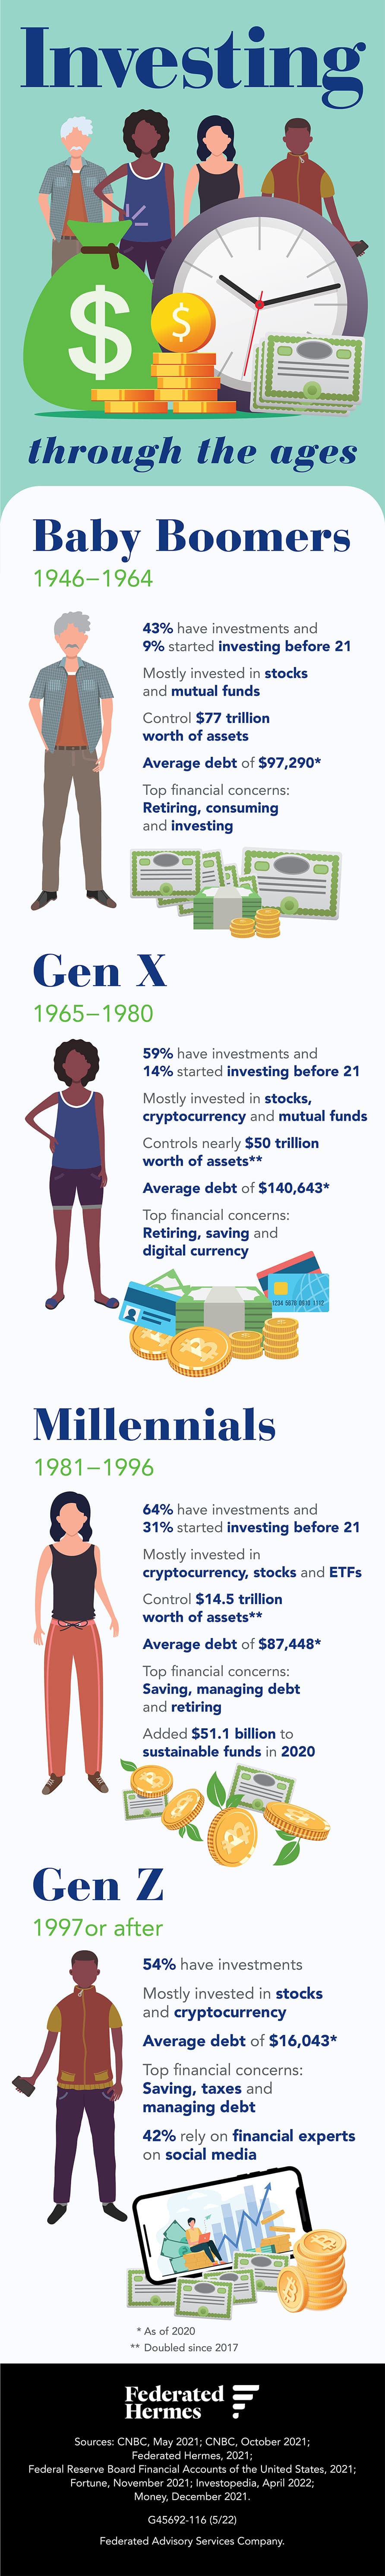 Investing through the ages Baby Boomers 1946 – 1964 43% have investments and 9% started investing before 21 Mostly invested in stocks and mutual funds Control $77 trillion worth of assets Average debt of $97,290* Top financial concerns: Retiring, consuming and investing Gen X 1965 – 1980 59% have investments and 14% started investing before 21 Mostly invested in stocks, cryptocurrency and mutual funds Controls nearly $50 trillion worth of assets** Average debt of $140,643* Top financial concerns: Retiring, saving and digital currency Millennials 1981 – 1996 64% have investments and 31% started investing before 21 Mostly invested in cryptocurrency, stocks and ETFs Control $14.5 trillion worth of assets** Average debt of $87,448* Top financial concerns: Saving, managing debt and retiring Added $51.1 billion to sustainable funds in 2020 Gen Z 1997 or after 54% have investments Mostly invested in stocks and cryptocurrency Average debt of $16,043* Top financial concerns: Saving, taxes and managing debt 42% rely on financial experts on social media *As of 2020 **Doubled since 2017 Information Sources: CNBC, May 2021; CNBC, October 2021; Federated Hermes, 2021; Federal Reserve Board Financial Accounts of the United States, 2021; Fortune, November 2021; Investopedia, April 2022; Money, December 2021. 